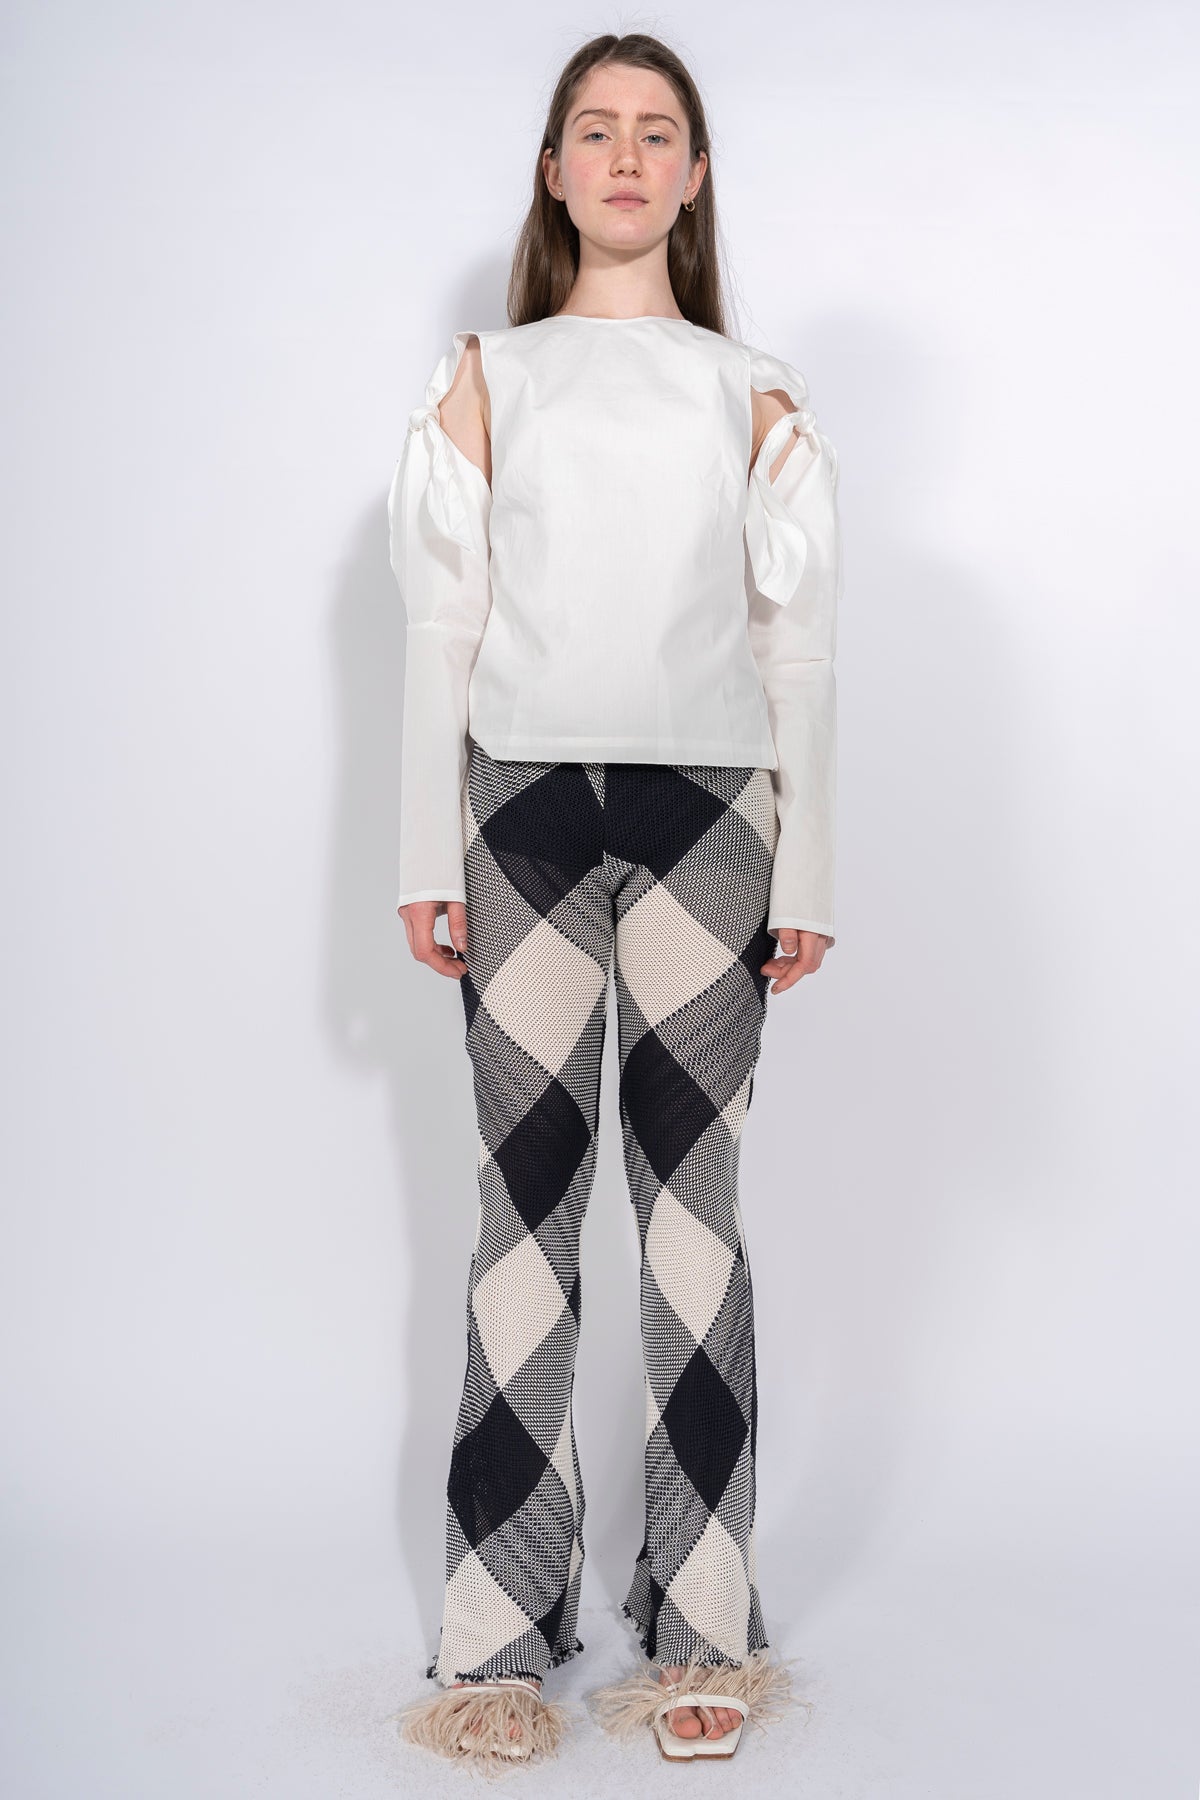 WHITE KNOT SLEEVE TOP marques almeida